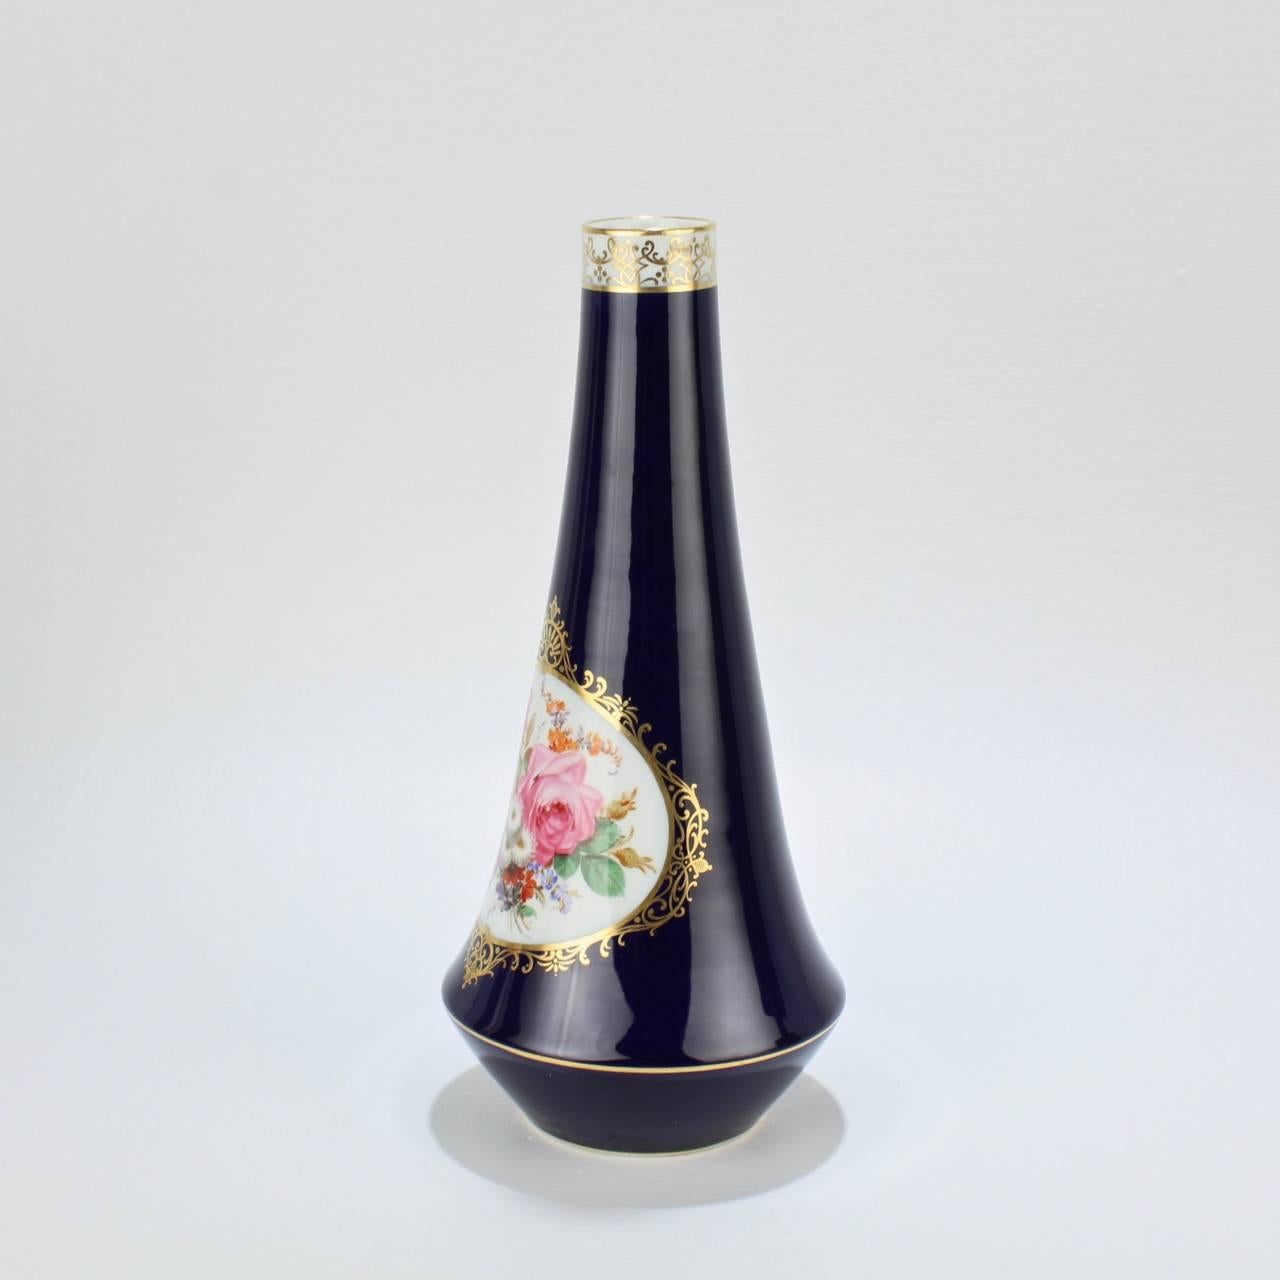 A fine Meissen porcelain vase with a cobalt blue ground, floral spray in a central cartouche, and gilding throughout. 

The vase has an elegant, Art Nouveau form with a long, tapered neck that flares outward to an inverted trumpet form, which